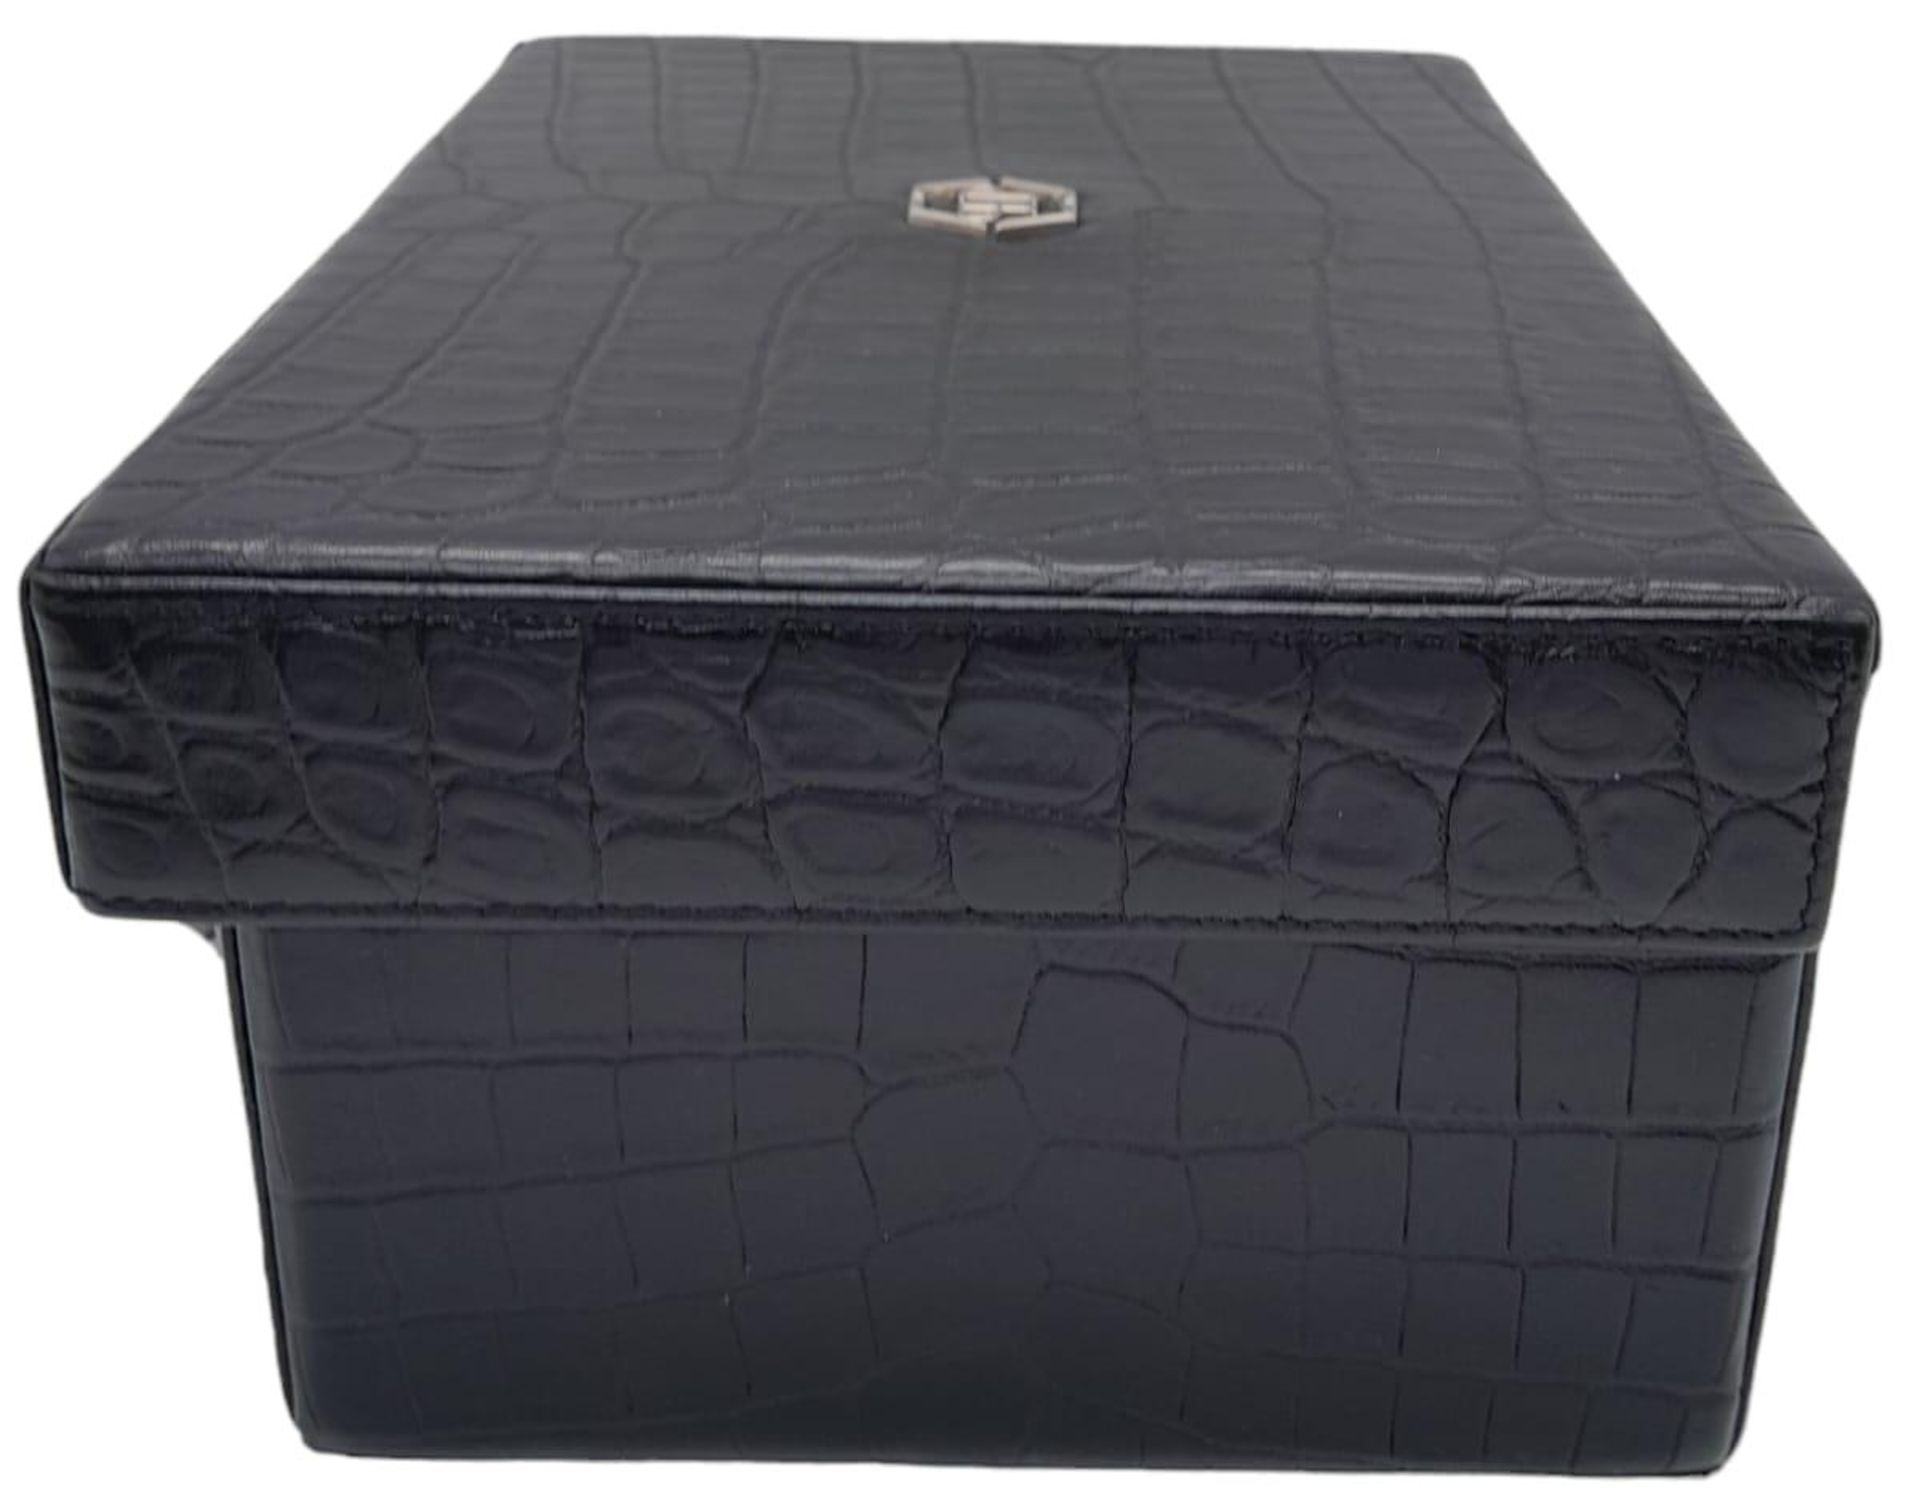 A Philipp Plein Handle Bag Statement. Crocodile Printed Patent Box Bag, Leather exterior, Leather - Image 4 of 11